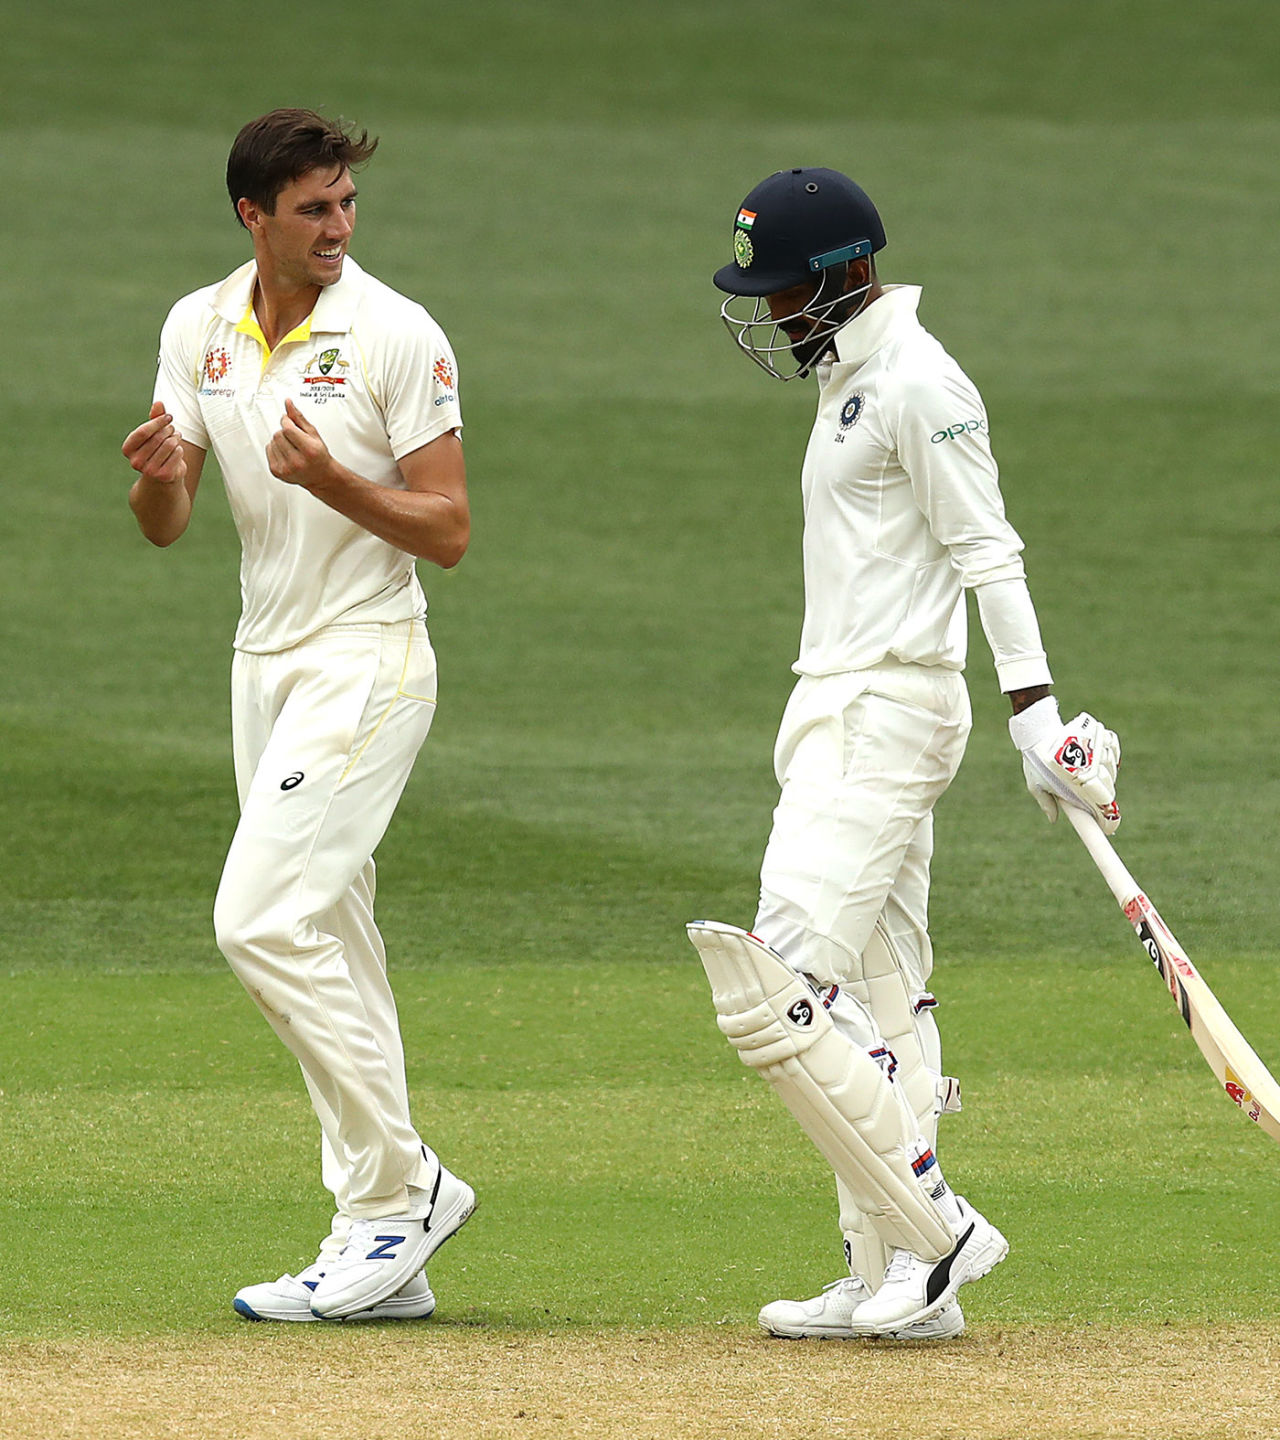 There was a good contest between Pat Cummins and KL Rahul, Australia v India, 1st Test, Adelaide, 3rd day, December 8, 2018